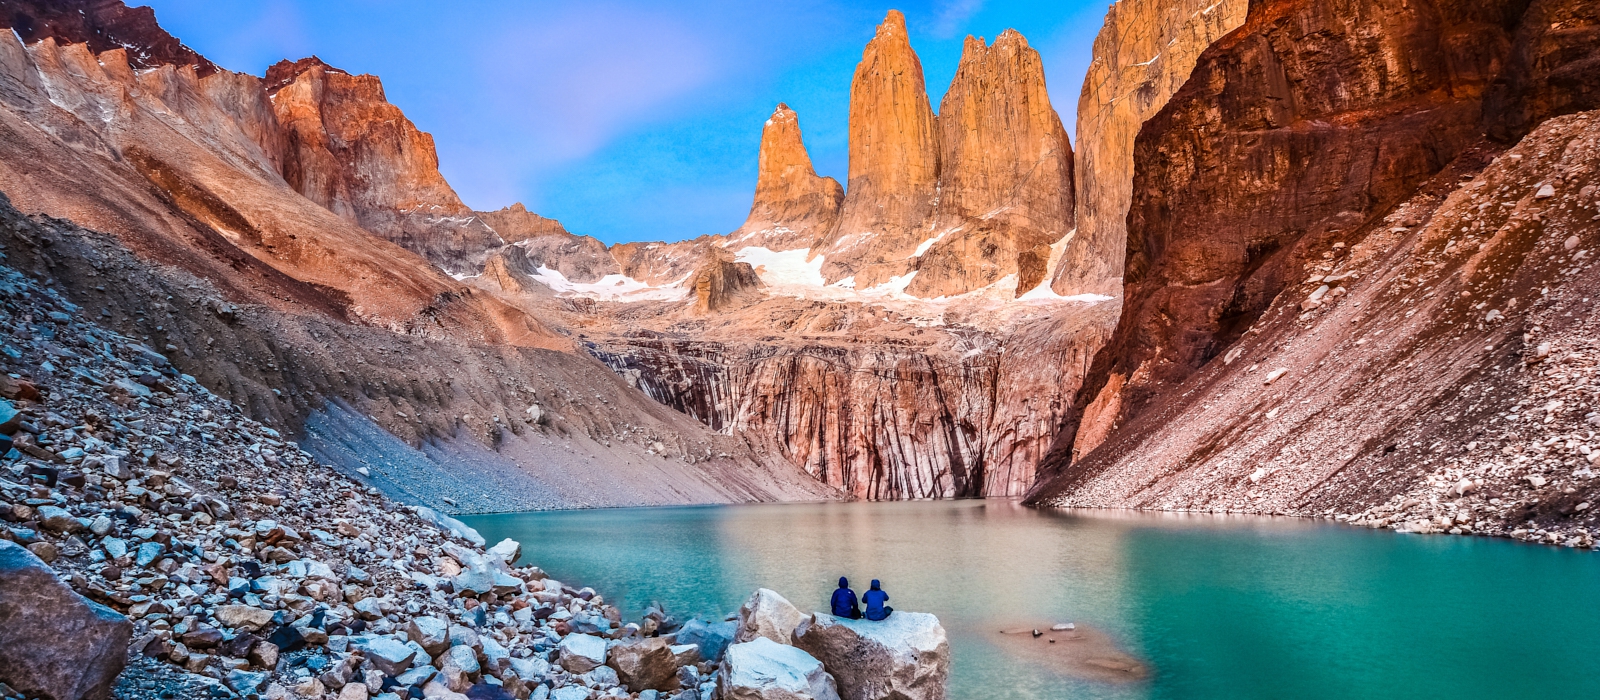 CHILE: FROM THE DESERT TO PATAGONIA